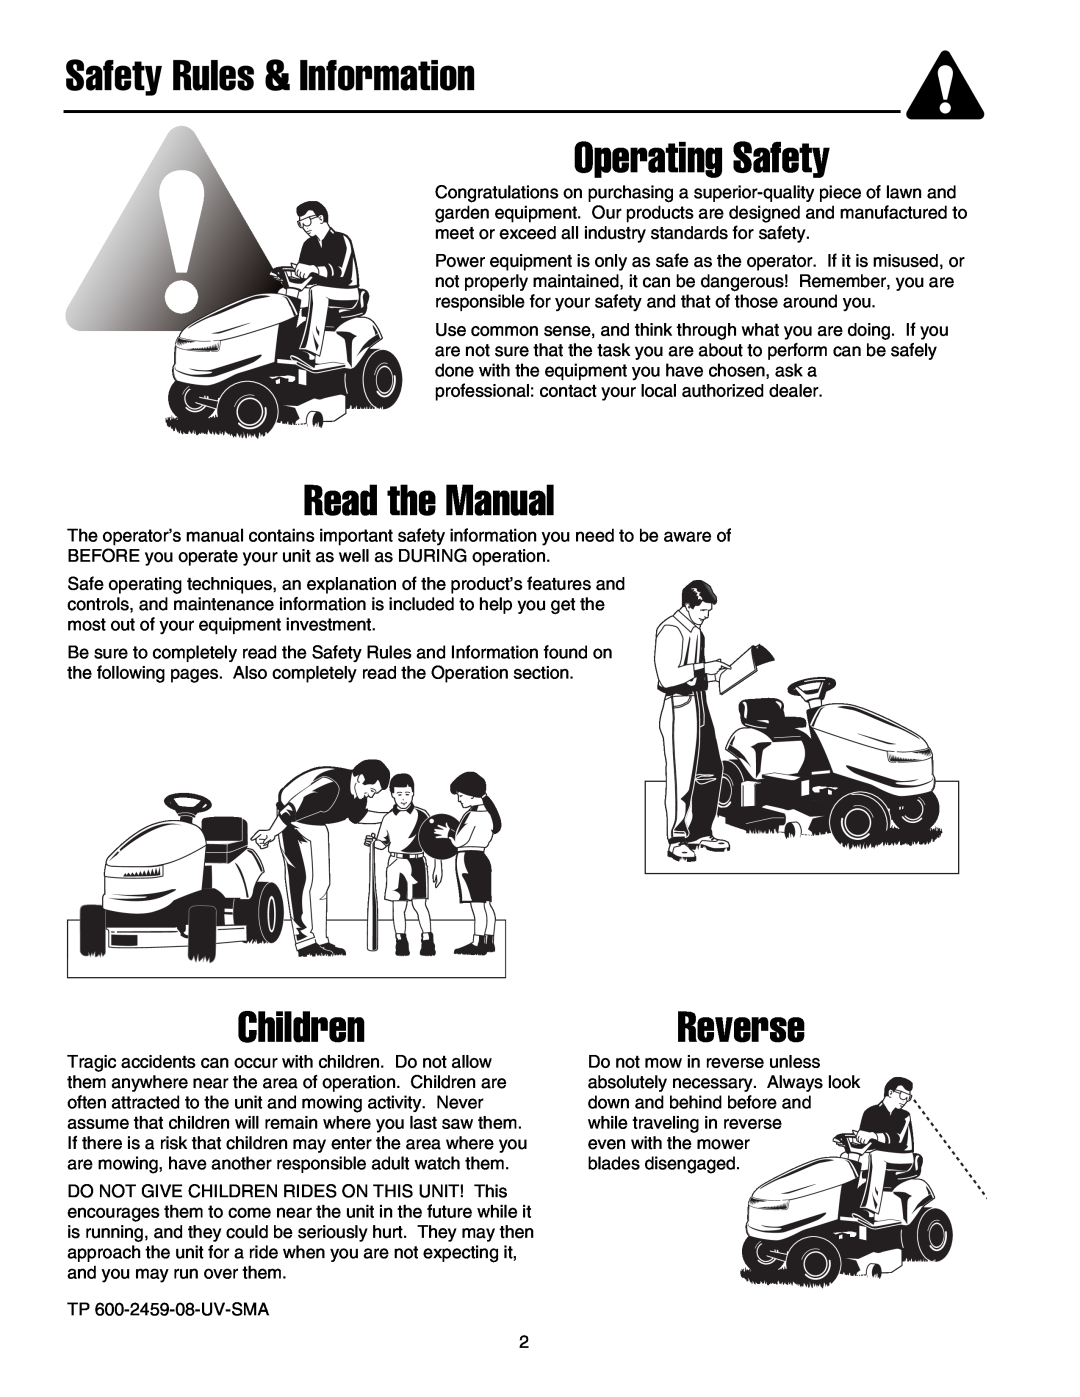 Snapper LT-200 Series manual Safety Rules & Information Operating Safety, Read the Manual, ChildrenReverse 